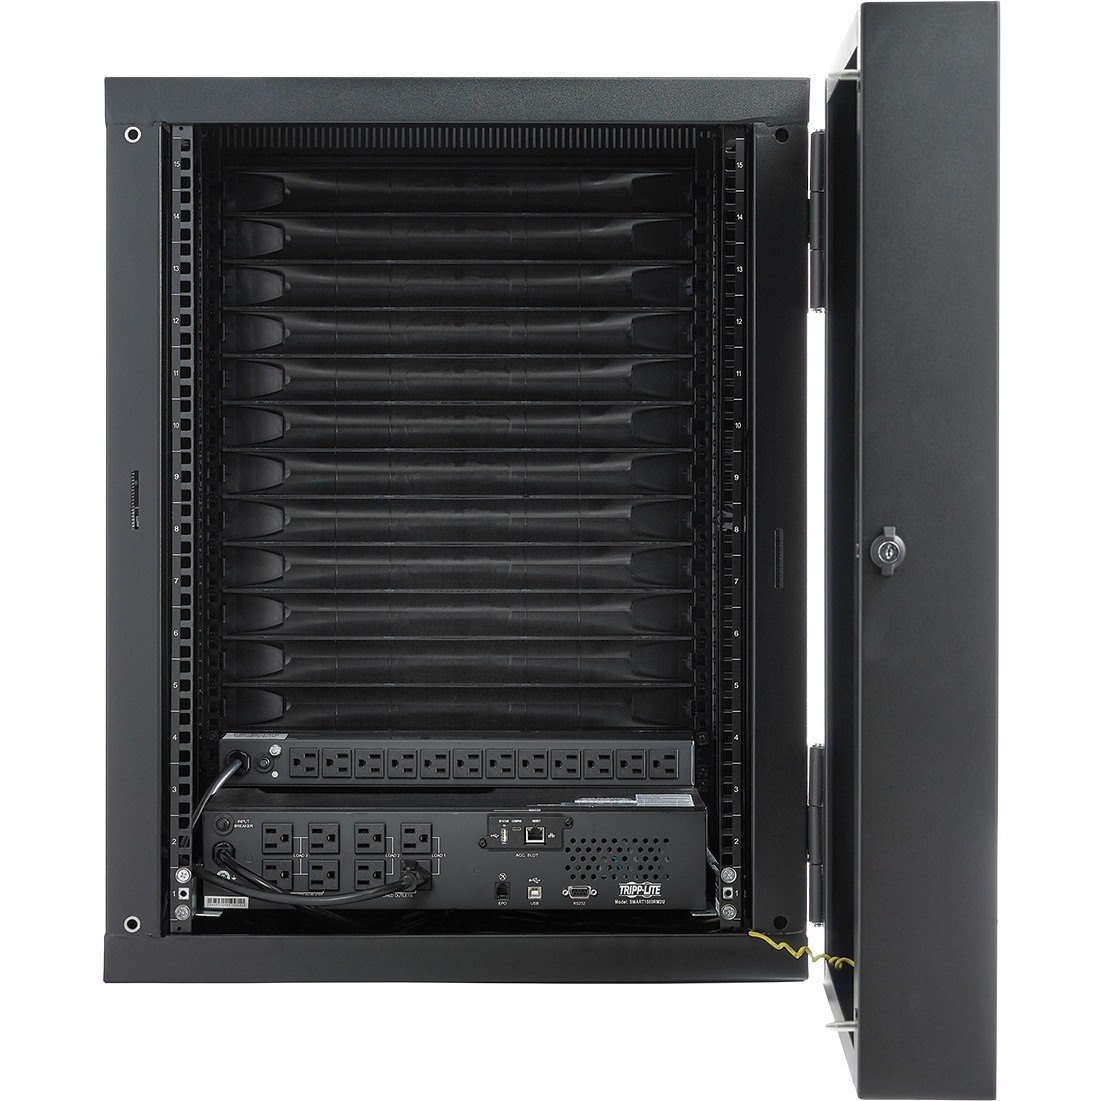 Tripp Lite by Eaton EdgeReady&trade; Micro Data Center - 12U, Wall-Mount, 1.5 kVA UPS, Network Management and PDU, 230V Kit